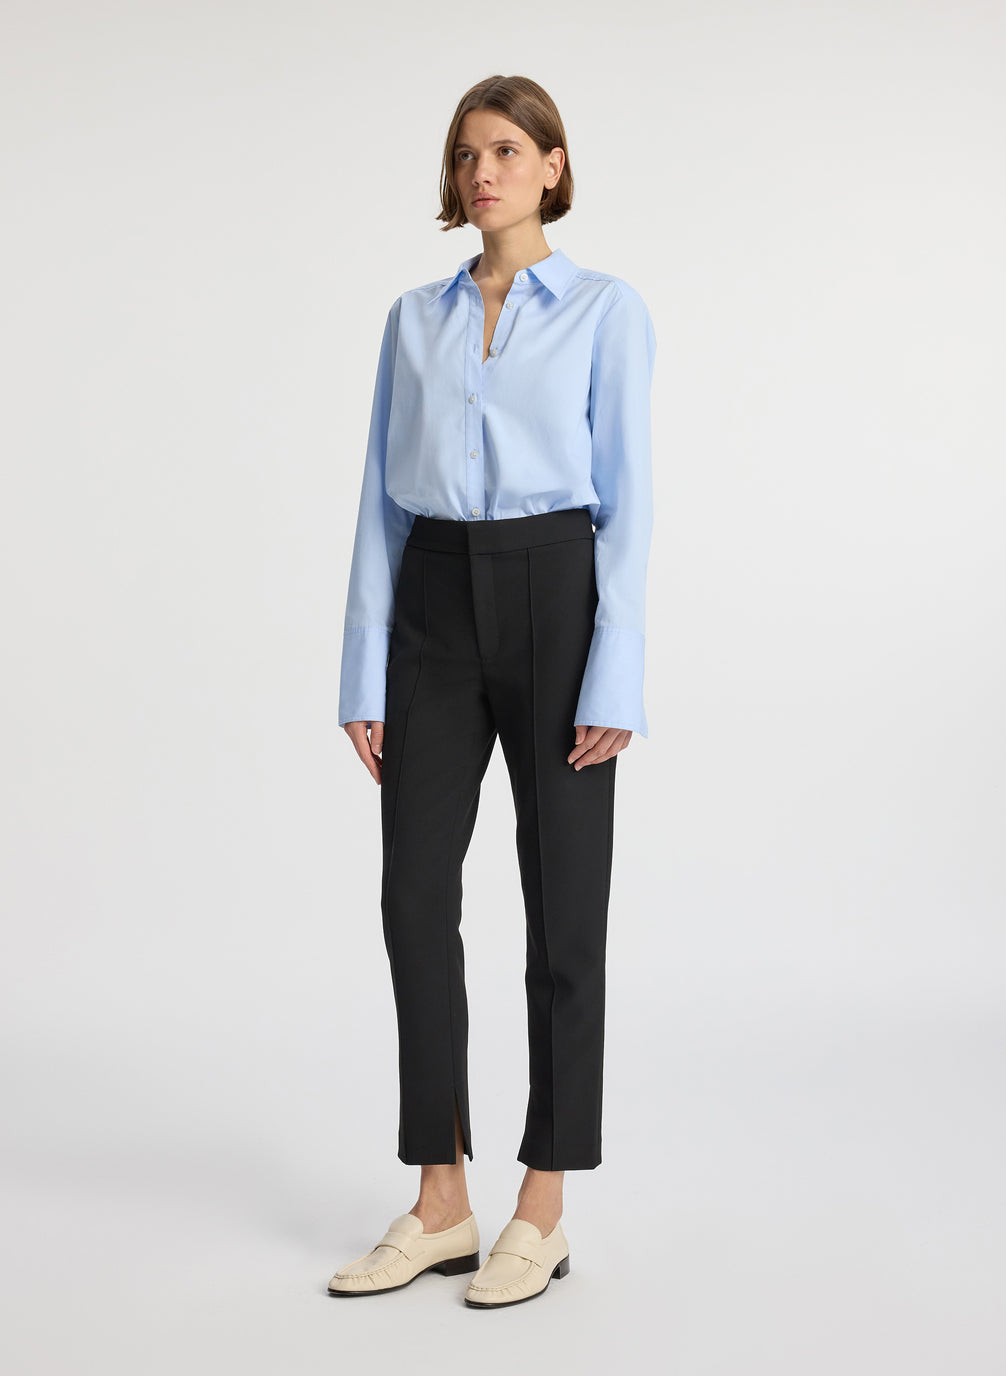 side view of woman wearing light blue button down collared shirt and black ankle length pants